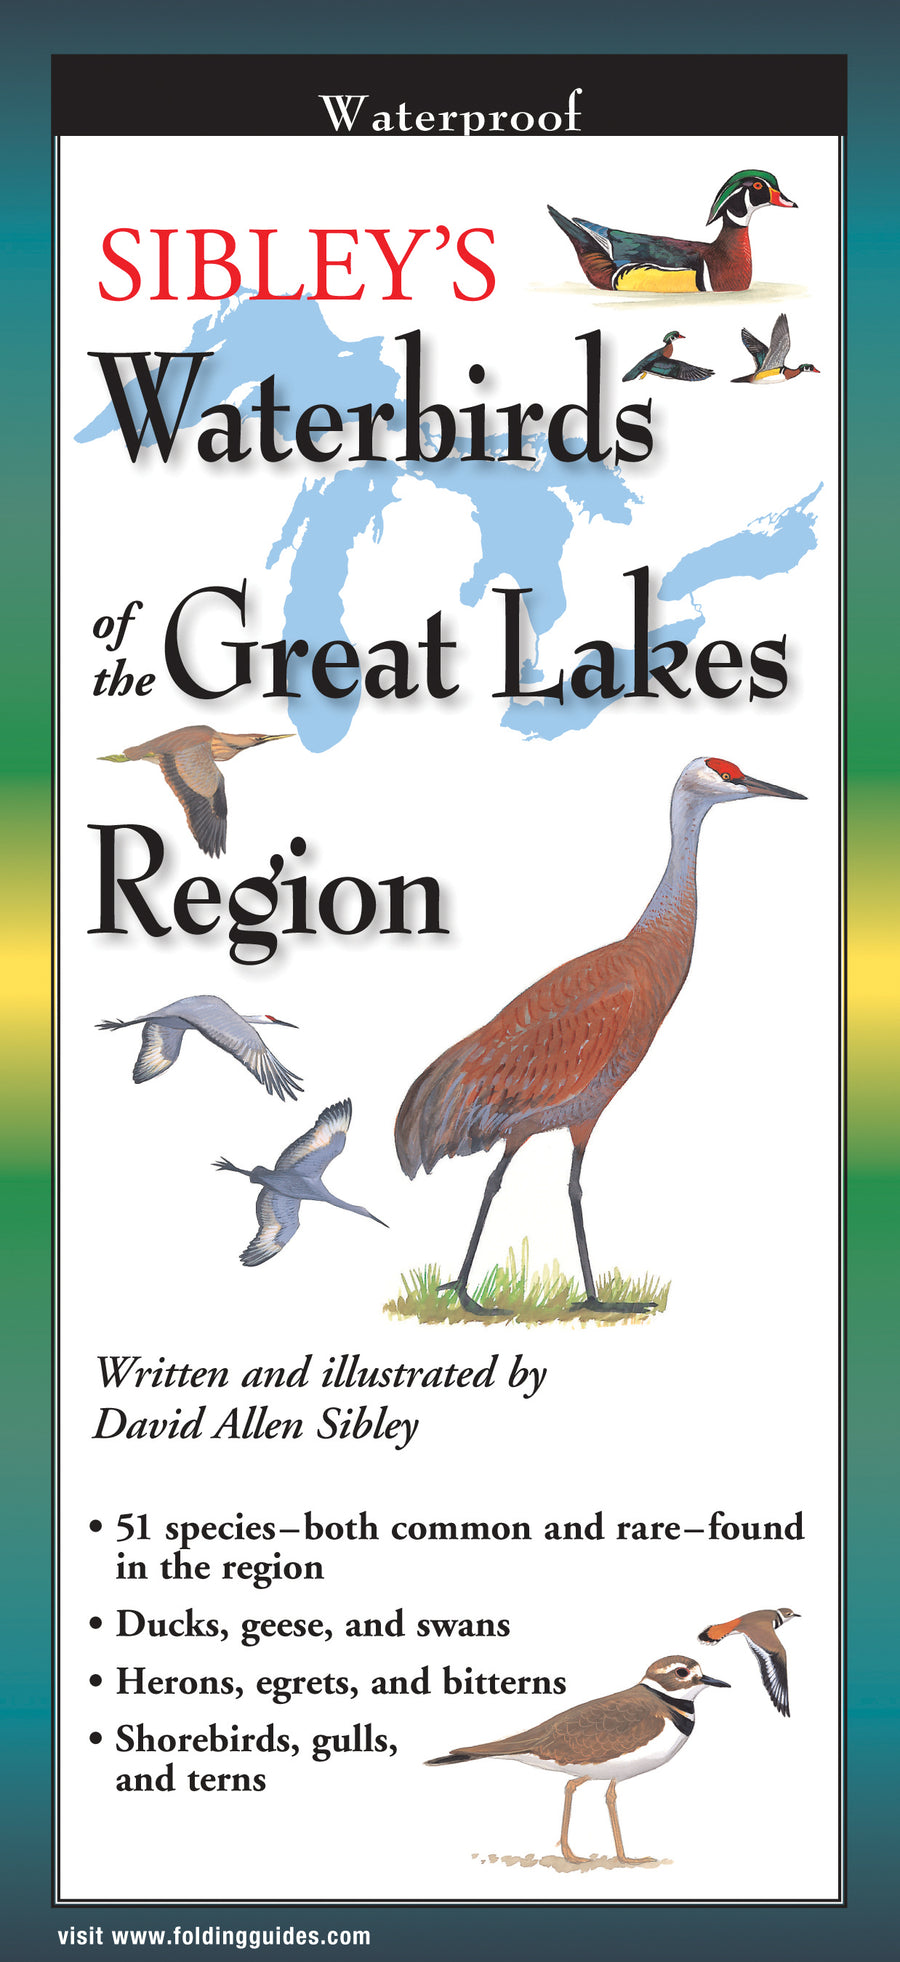 Sibley's Waterbirds of the Great Lakes Region - Folding Guide